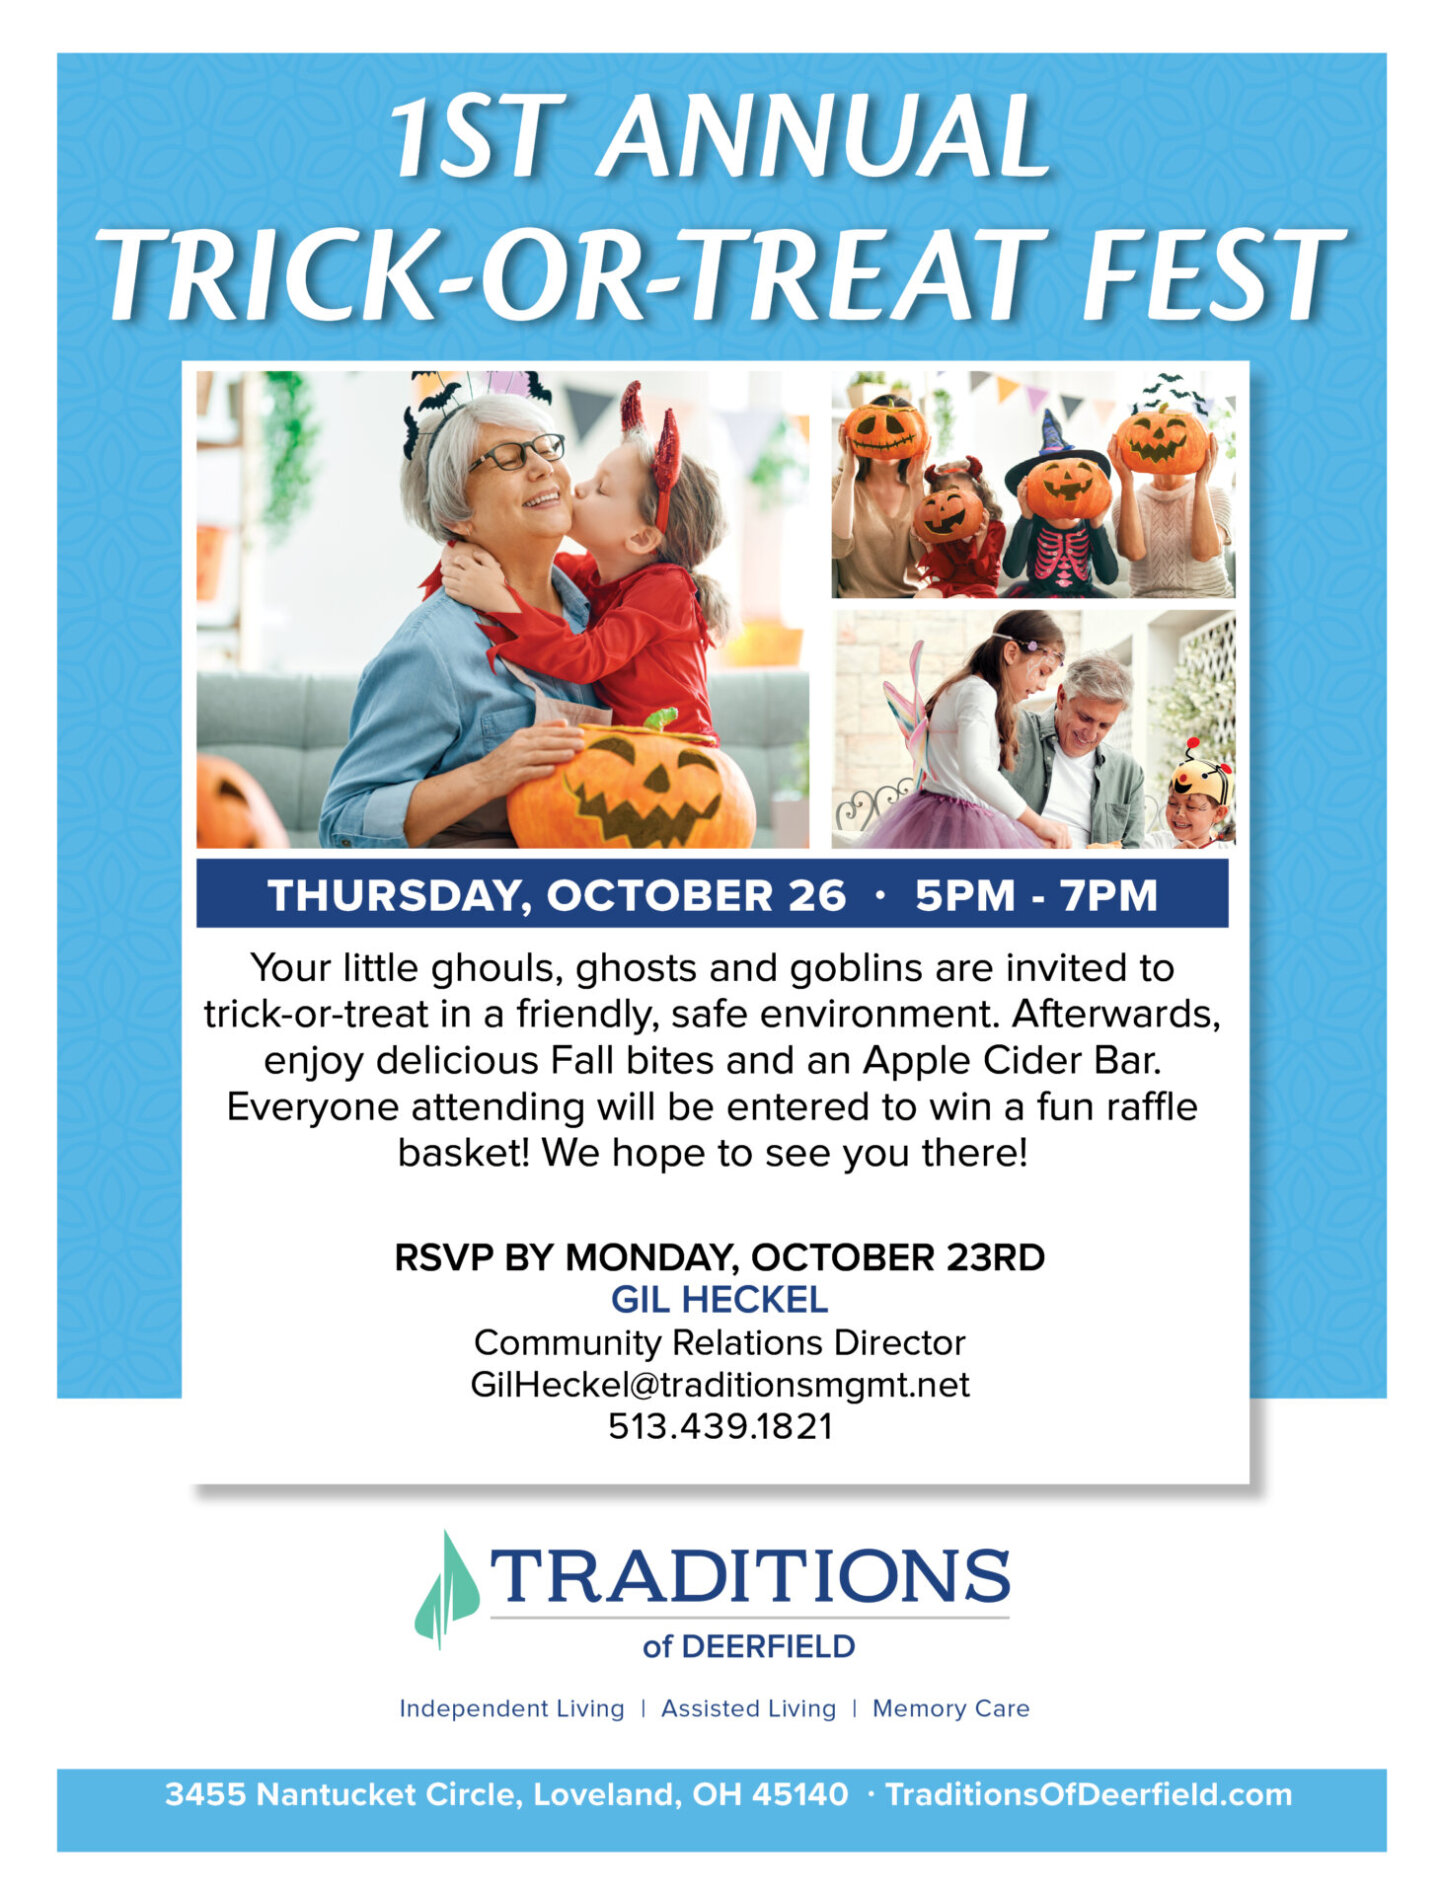 1st Annual TrickorTreat Fall Fest Traditions of Deerfield